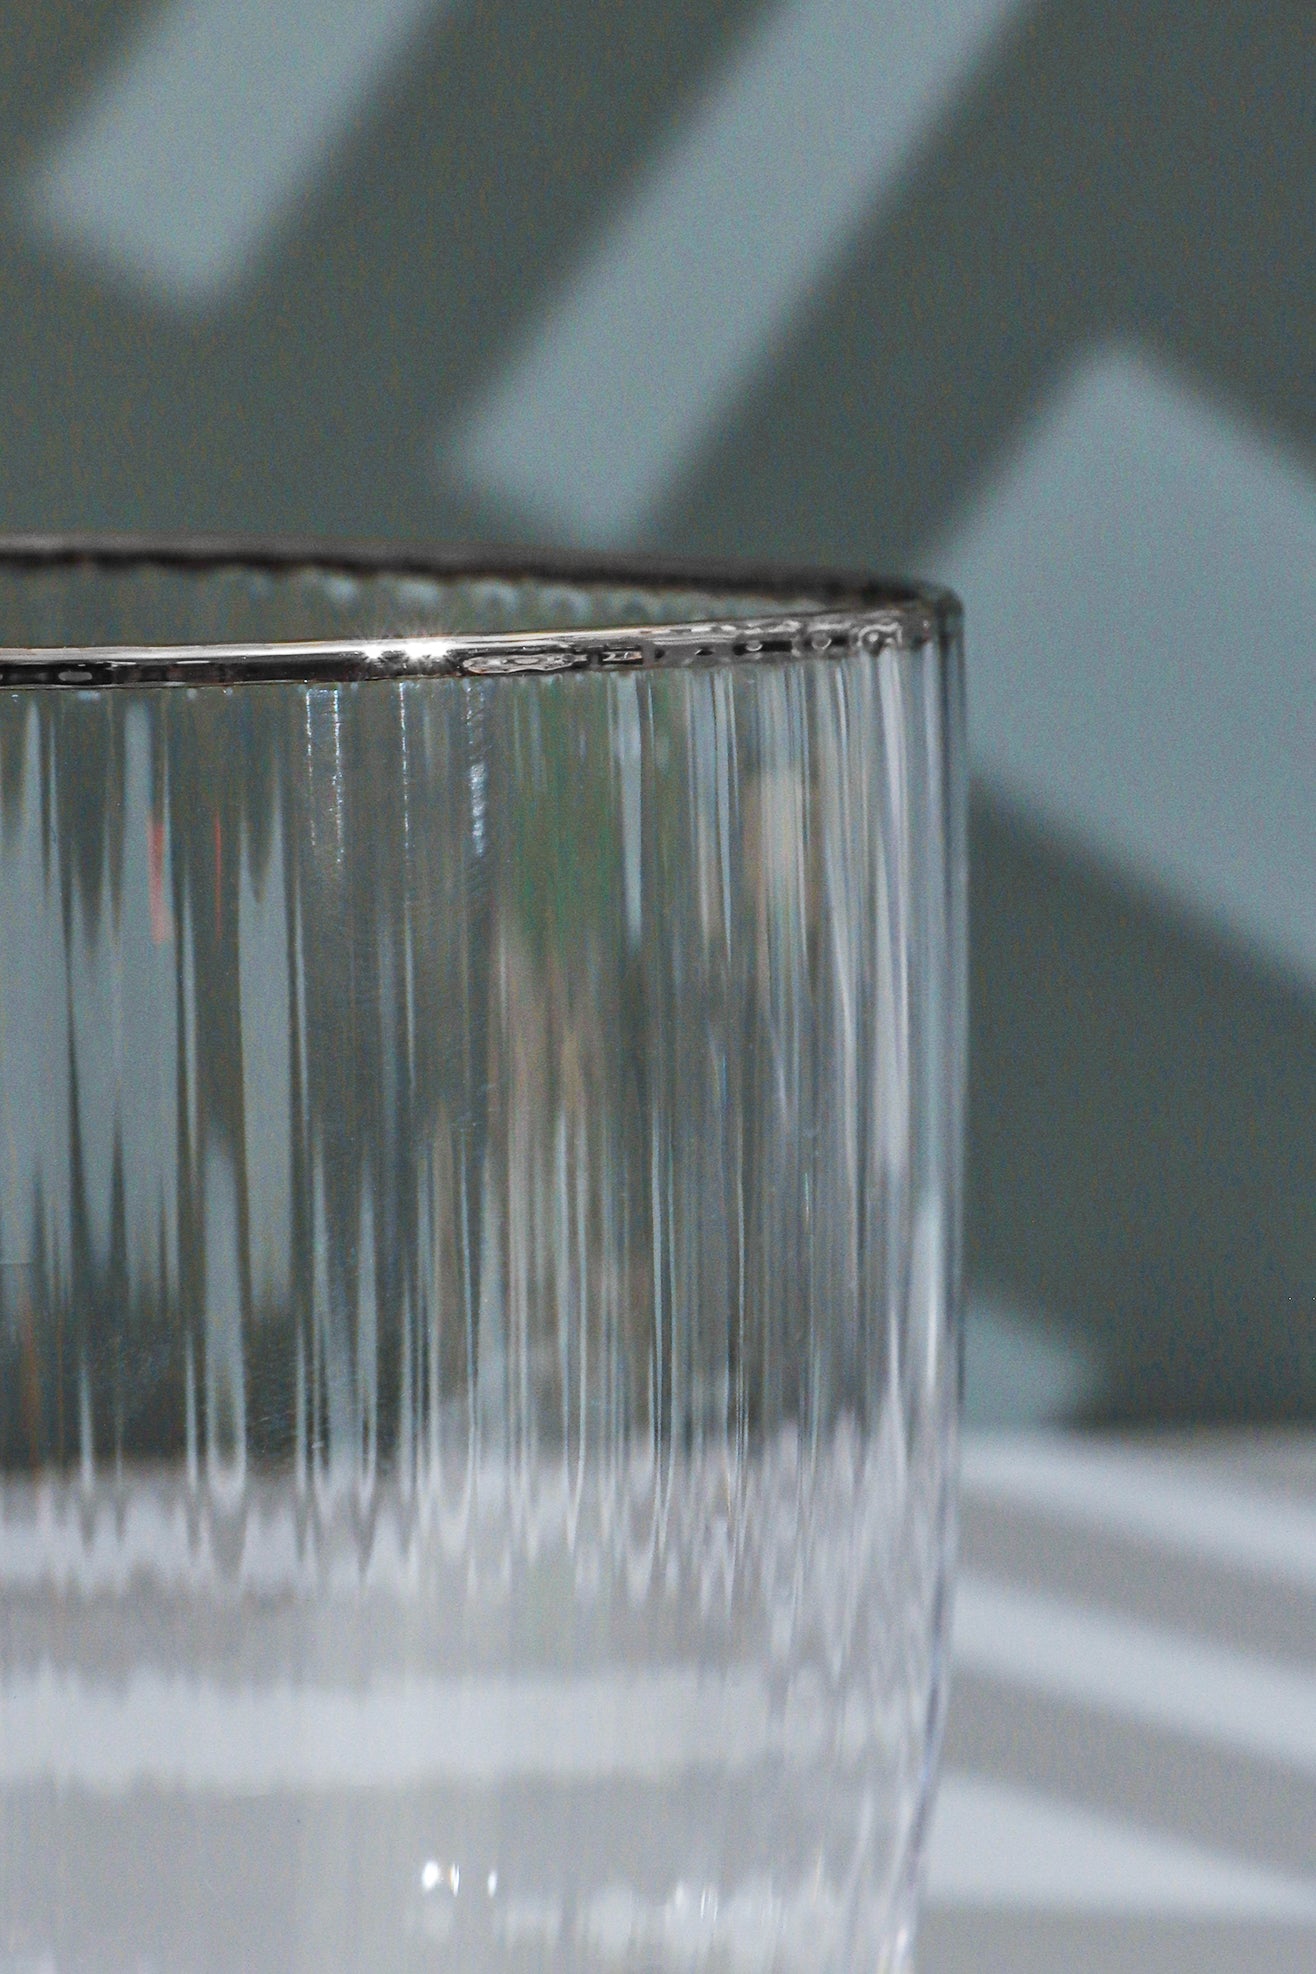 Set of 4 Ribbed Tumbler Glasses with Silver Rim